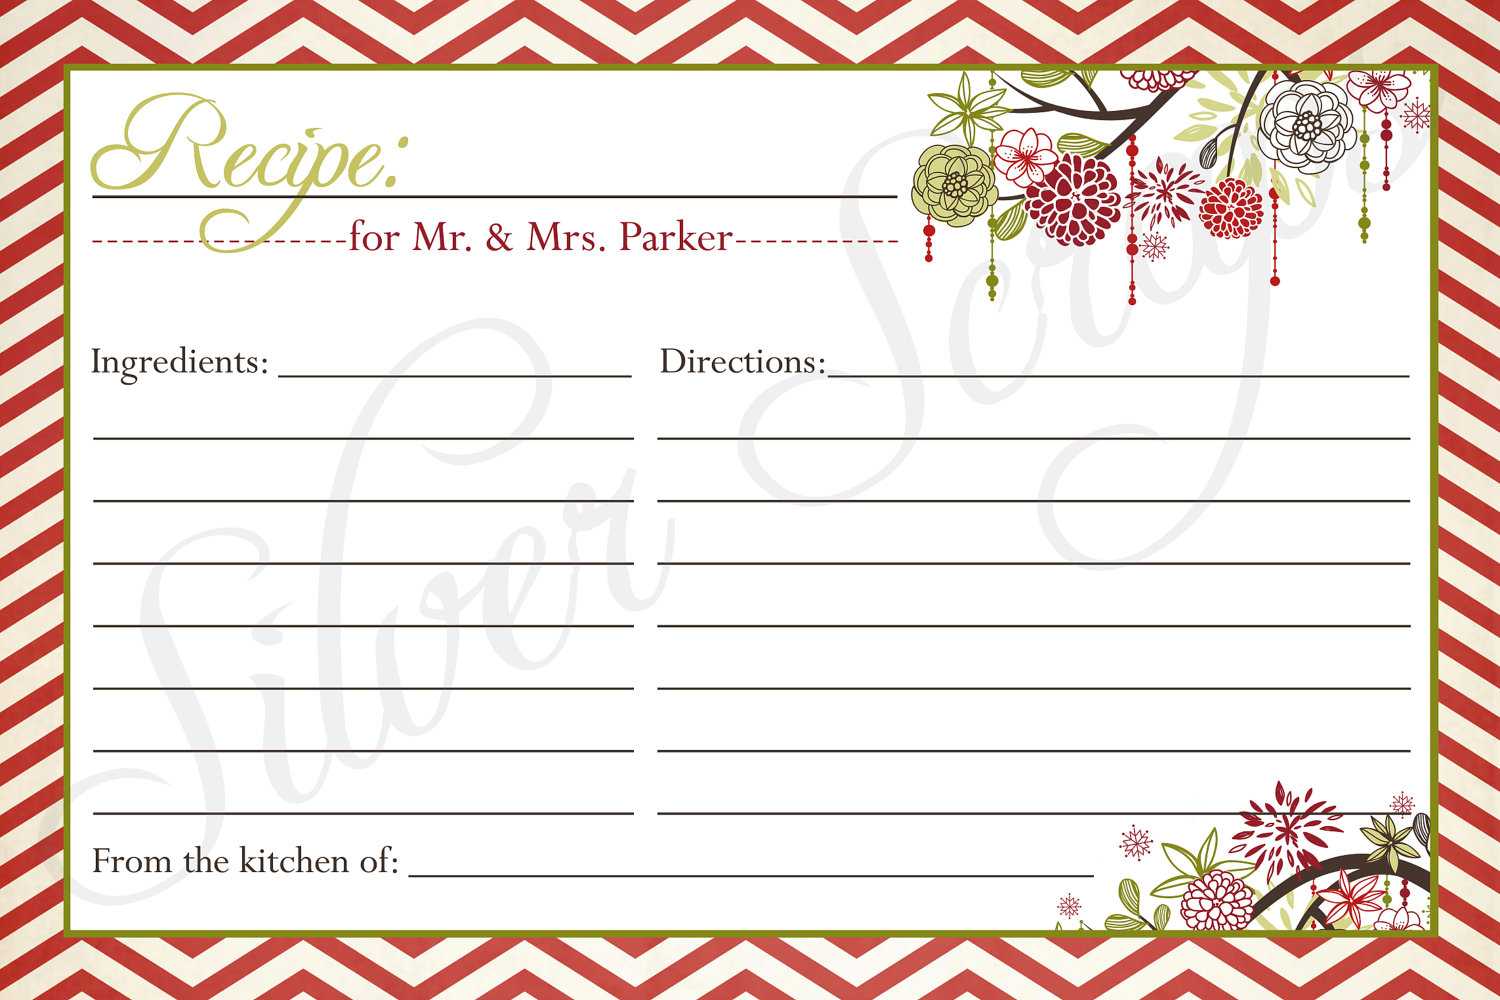 021 Word Recipe Card Template 4X6 Luxury No New This Throughout Microsoft Word Recipe Card Template